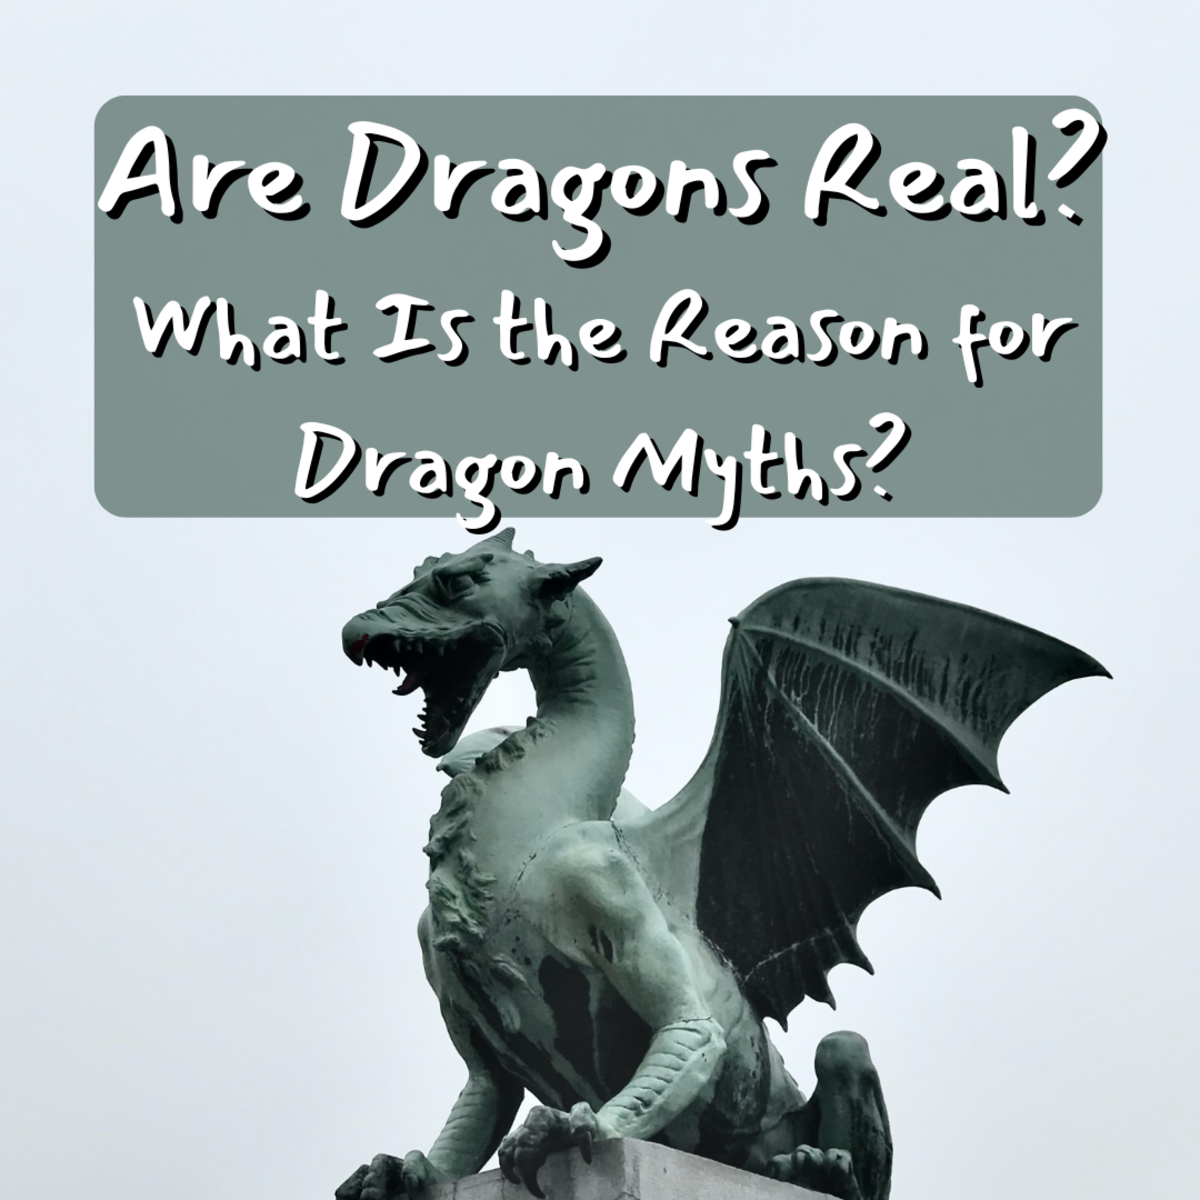 Are Dragons Real? What Is the Reason for Dragon Myths?